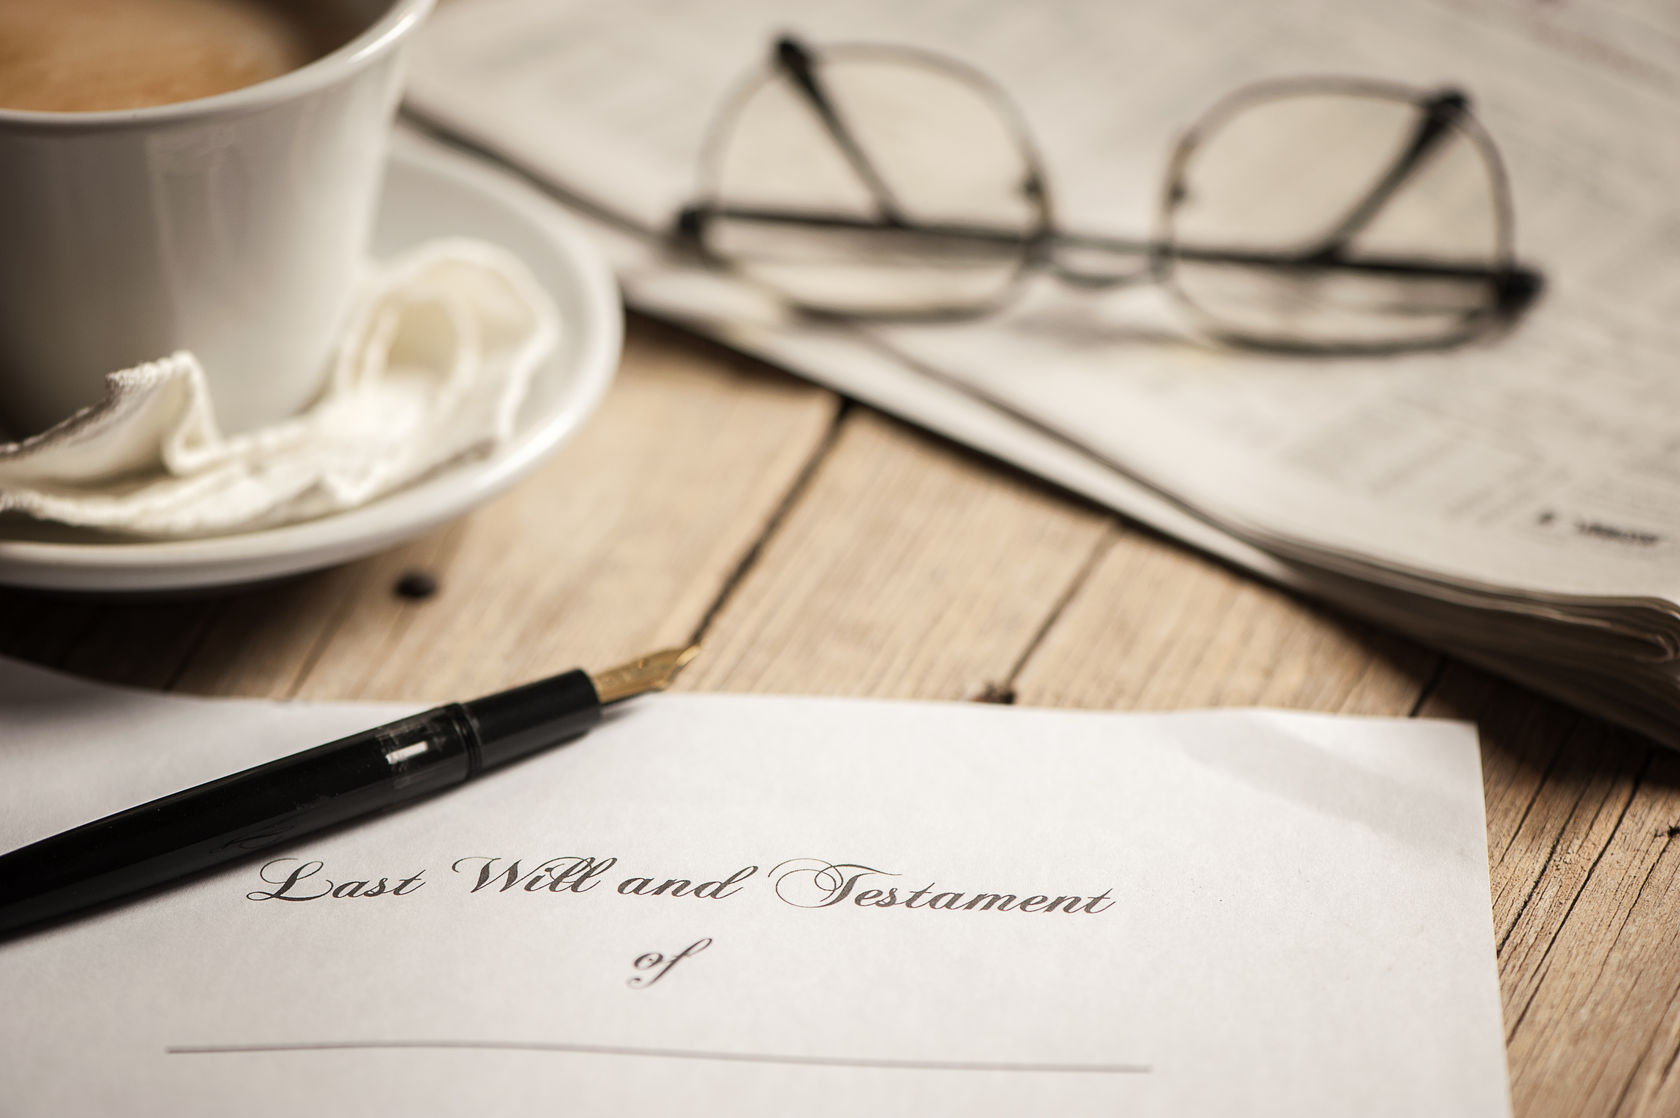 last will and testament with glasses and a pen